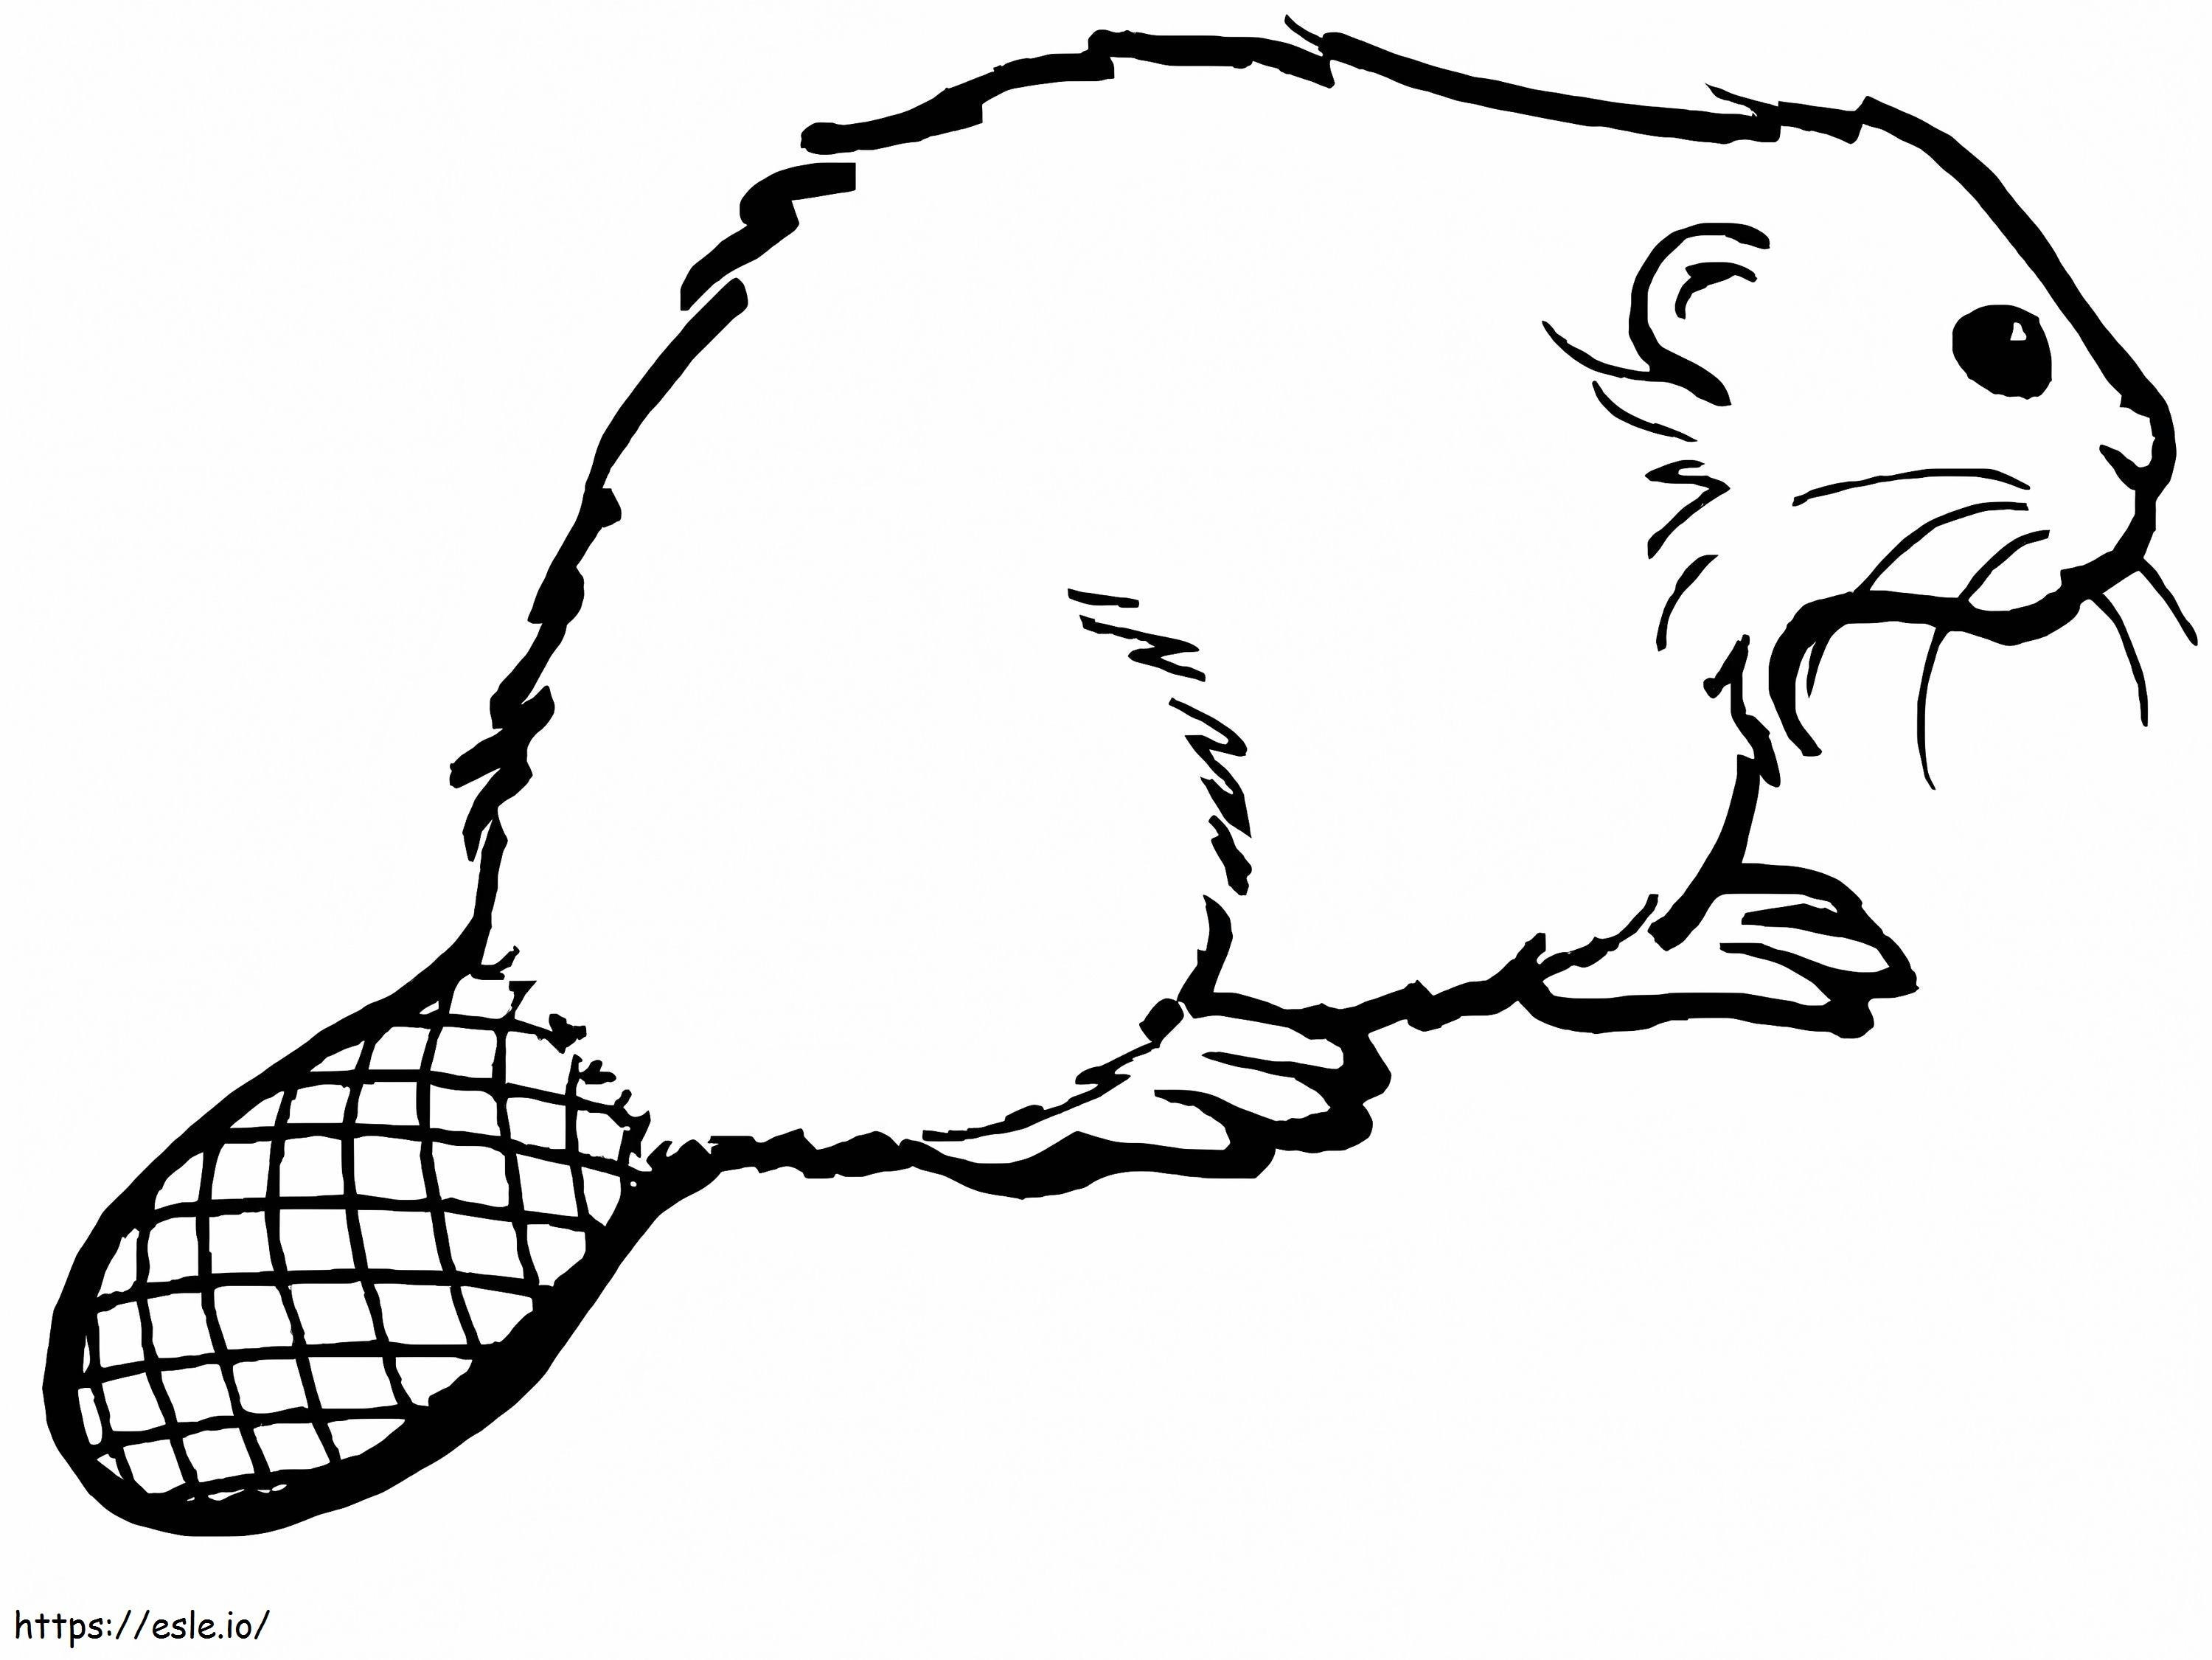 Sitting Beaver coloring page